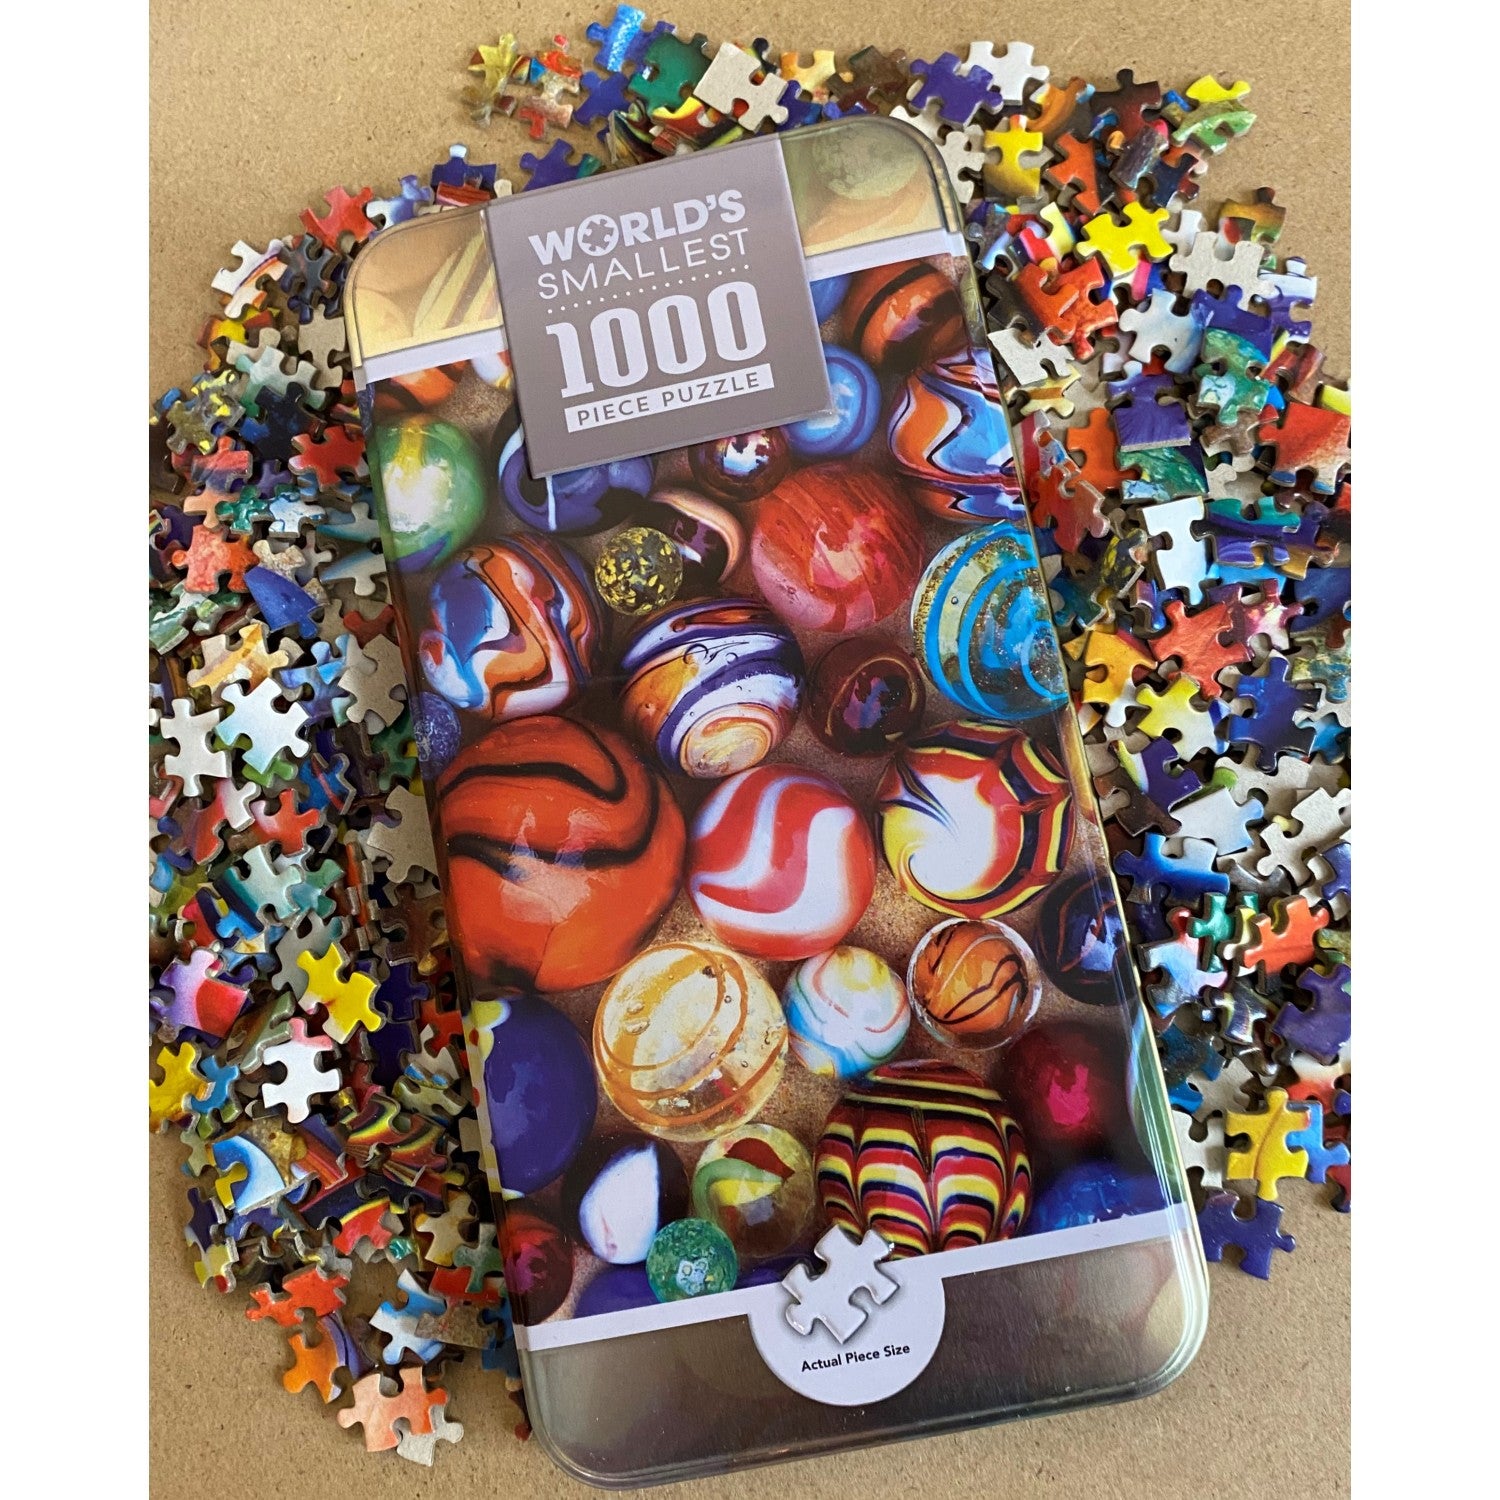 World's Smallest - All My Marbles 1000 Piece Jigsaw Puzzle